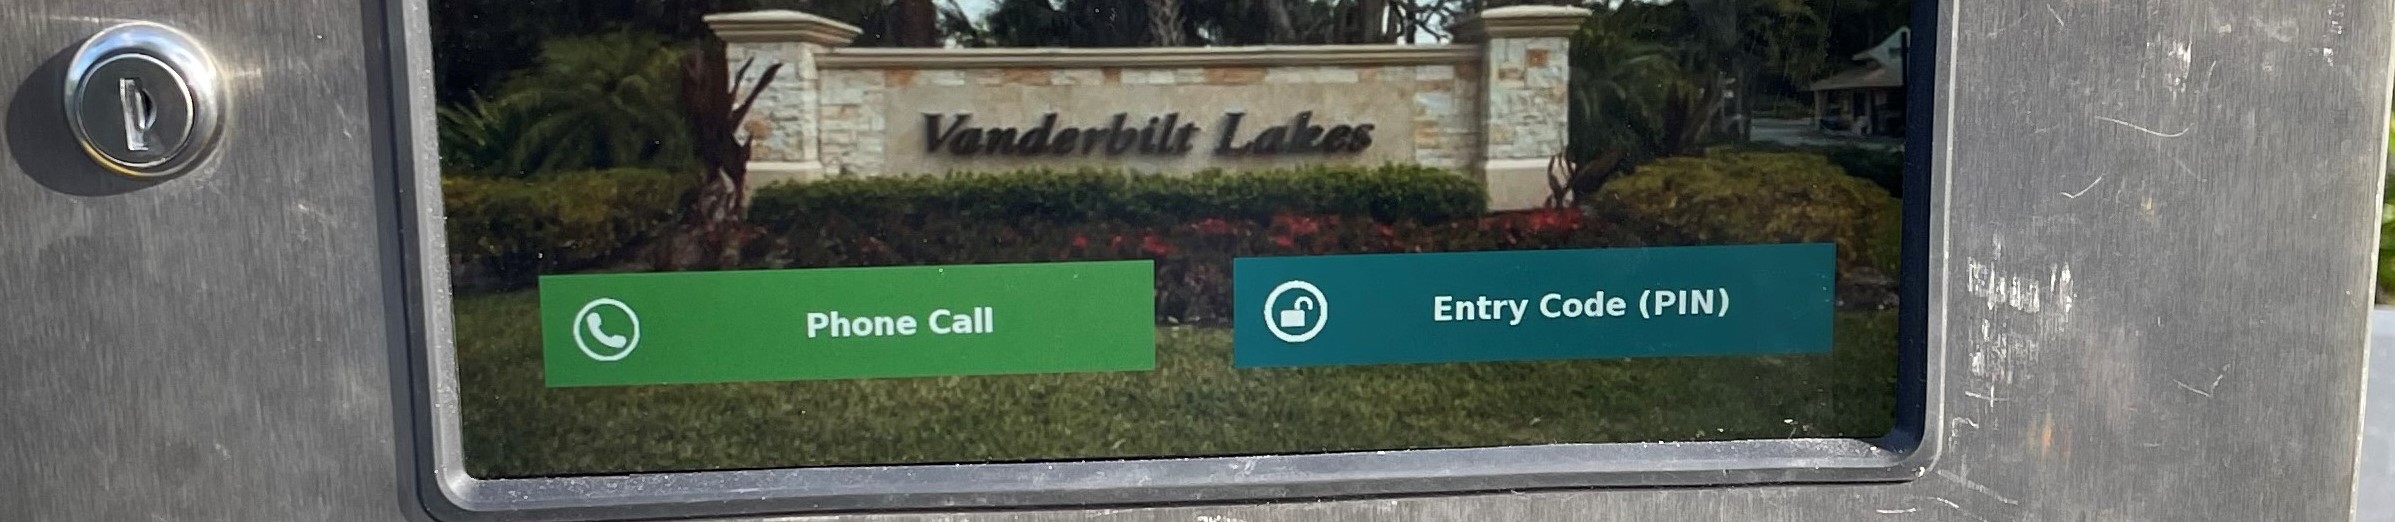 close up of two buttons on call box